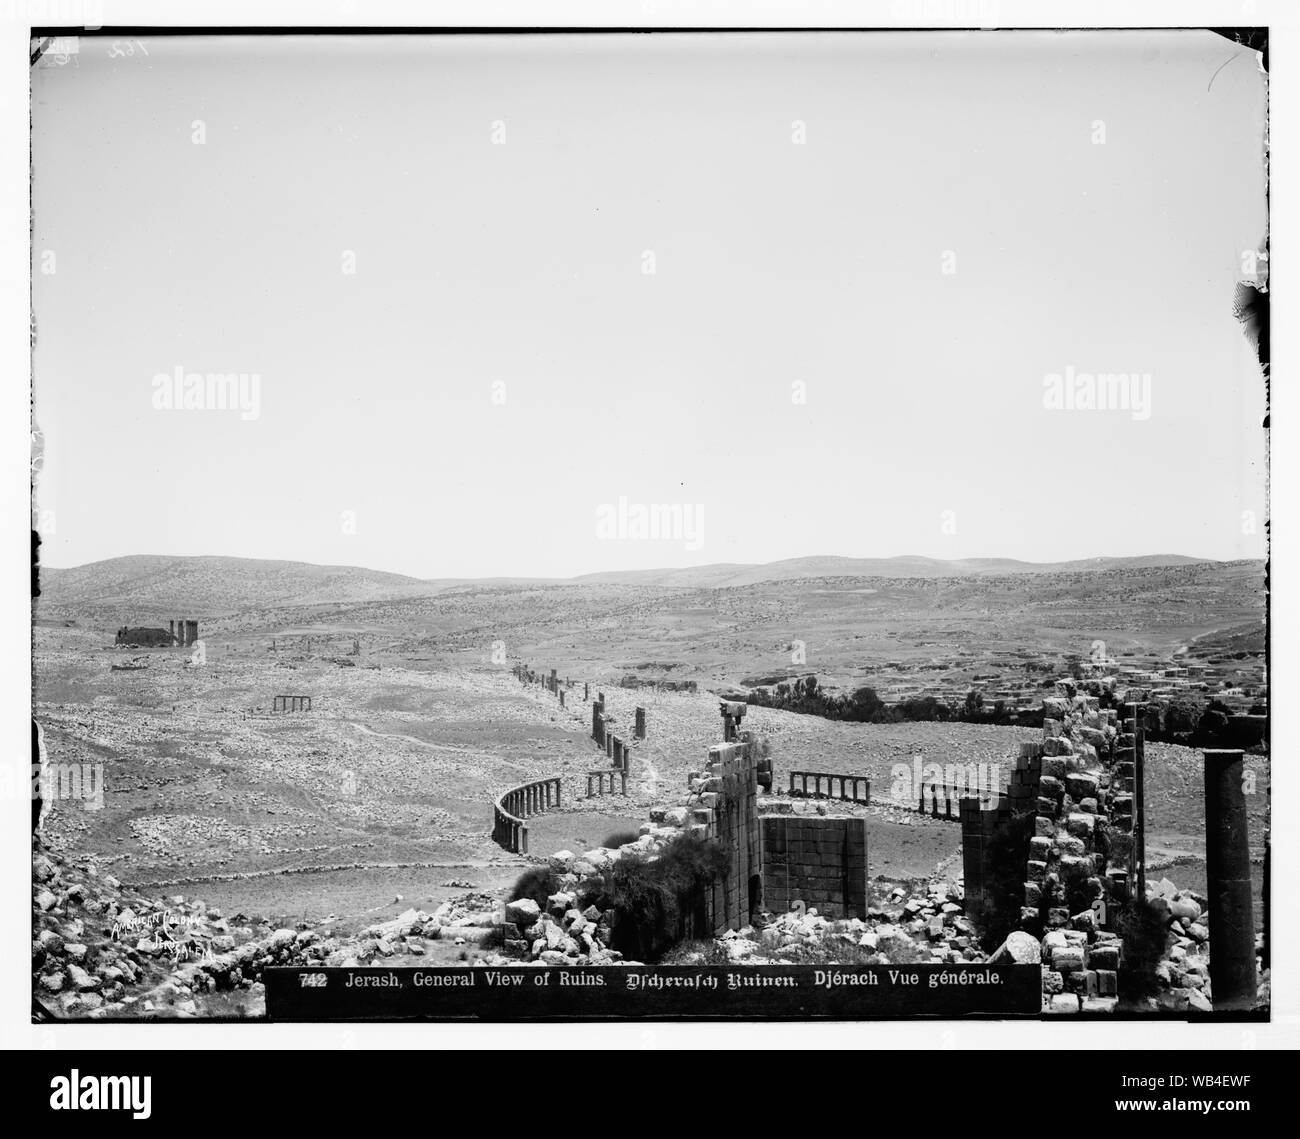 East of Jordan and the Dead Sea. General view of ruins of Jerash Abstract/medium: G. Eric and Edith Matson Photograph Collection Stock Photo